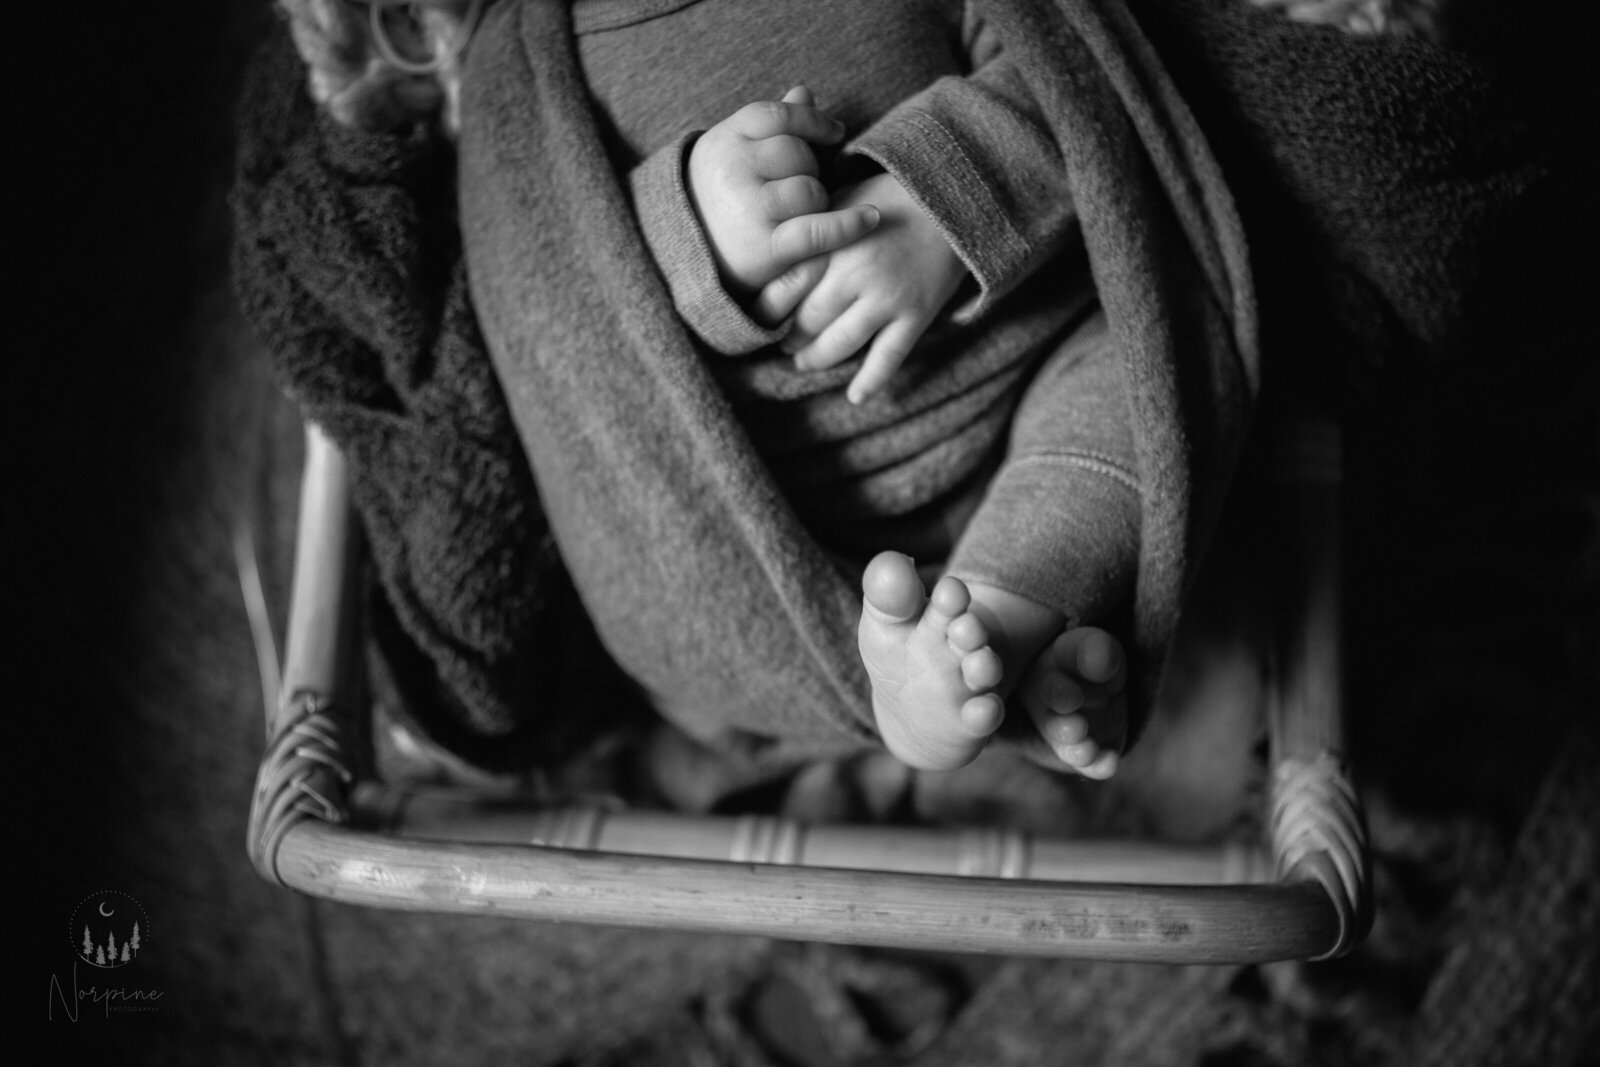 A black and white image of a newborn wrapped in a rattan bed with the focus on his hands and feet